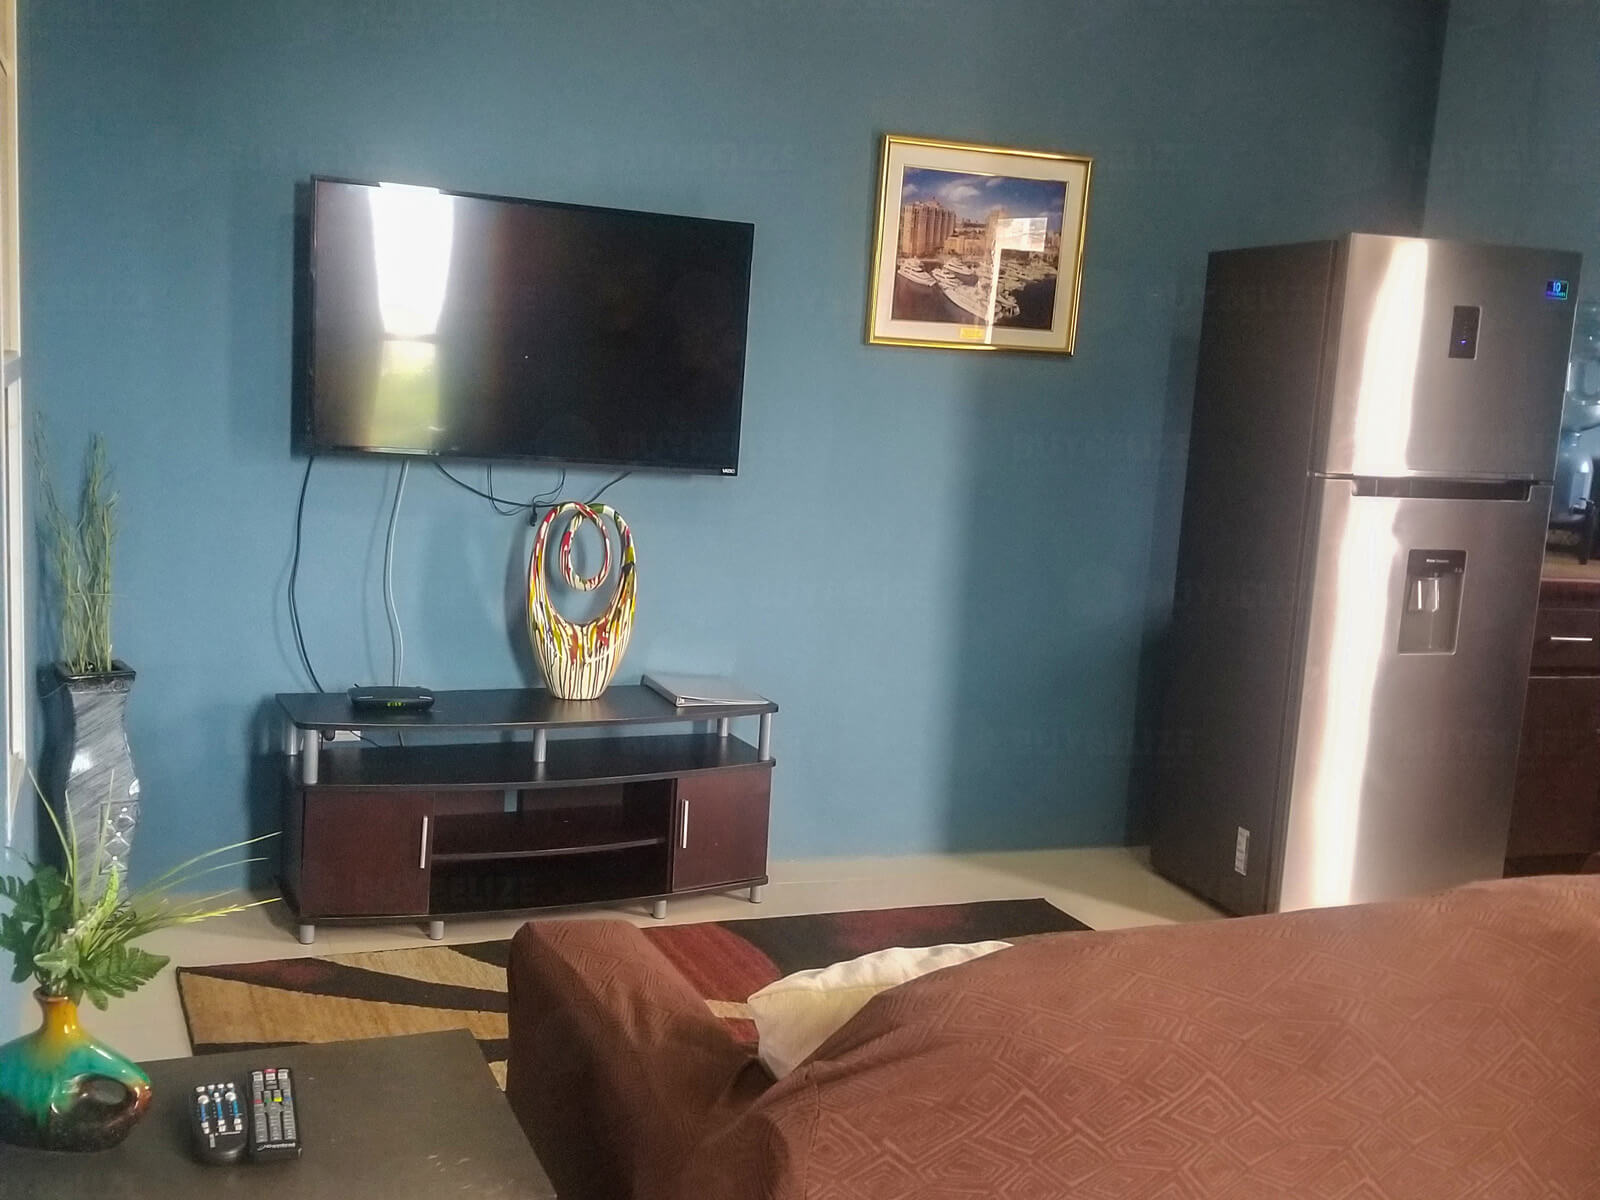 2 Bed 1 Bath Apartment for Rent in Belize City